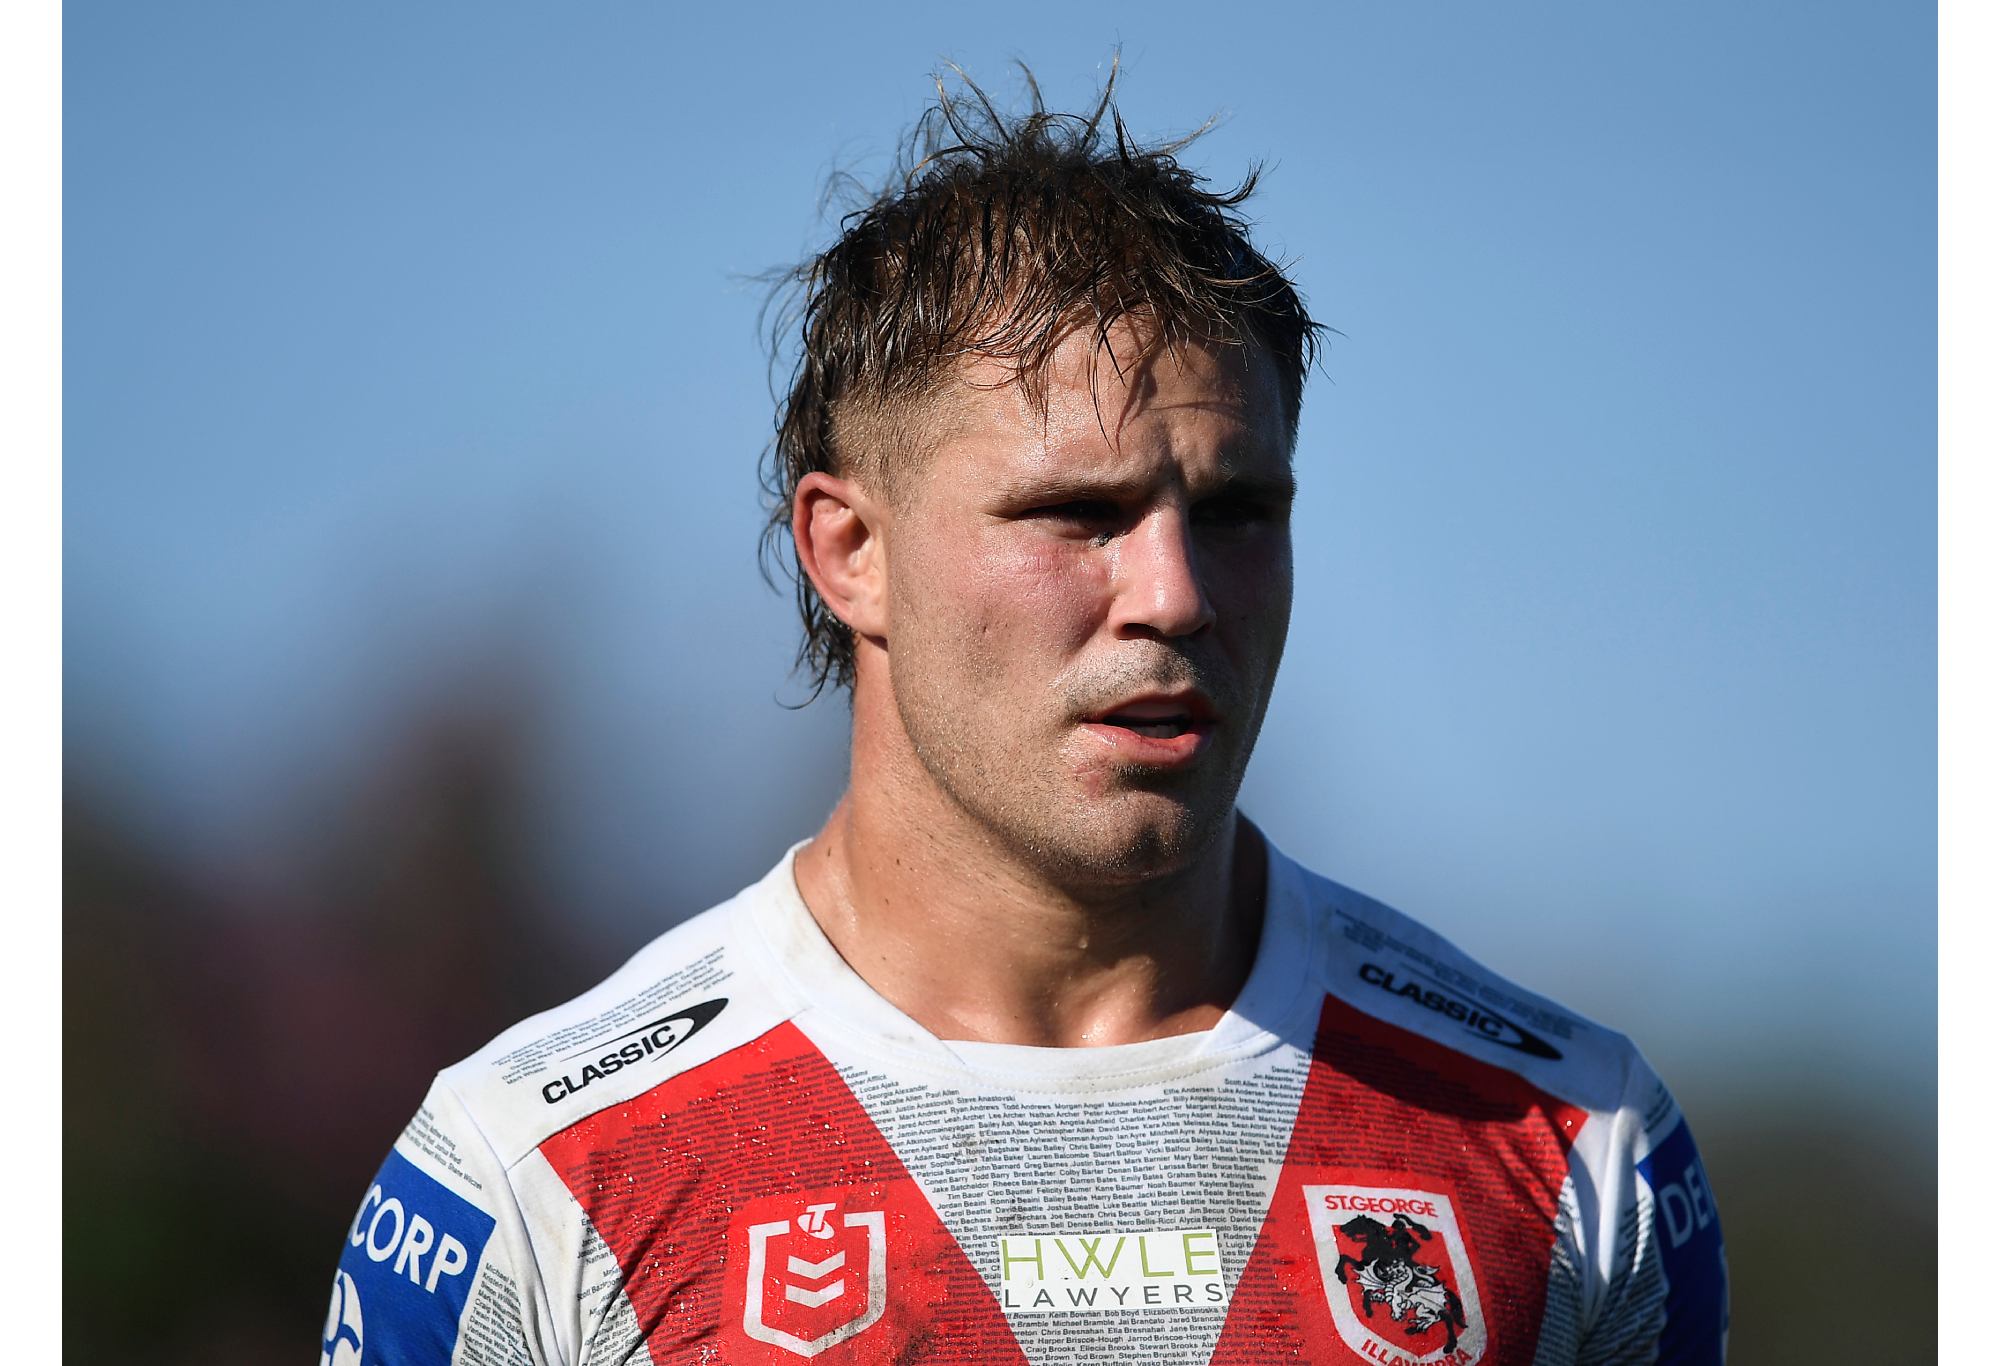 ROCKHAMPTON, AUSTRALIA - AUGUST 28: Jack De Belin of the Dragons looks on during the round 24 NRL match between the St George Illawarra Dragons and the North Queensland Cowboys at Browne Park, on August 28, 2021, in Rockhampton, Australia. (Photo by Ian Hitchcock/Getty Images)